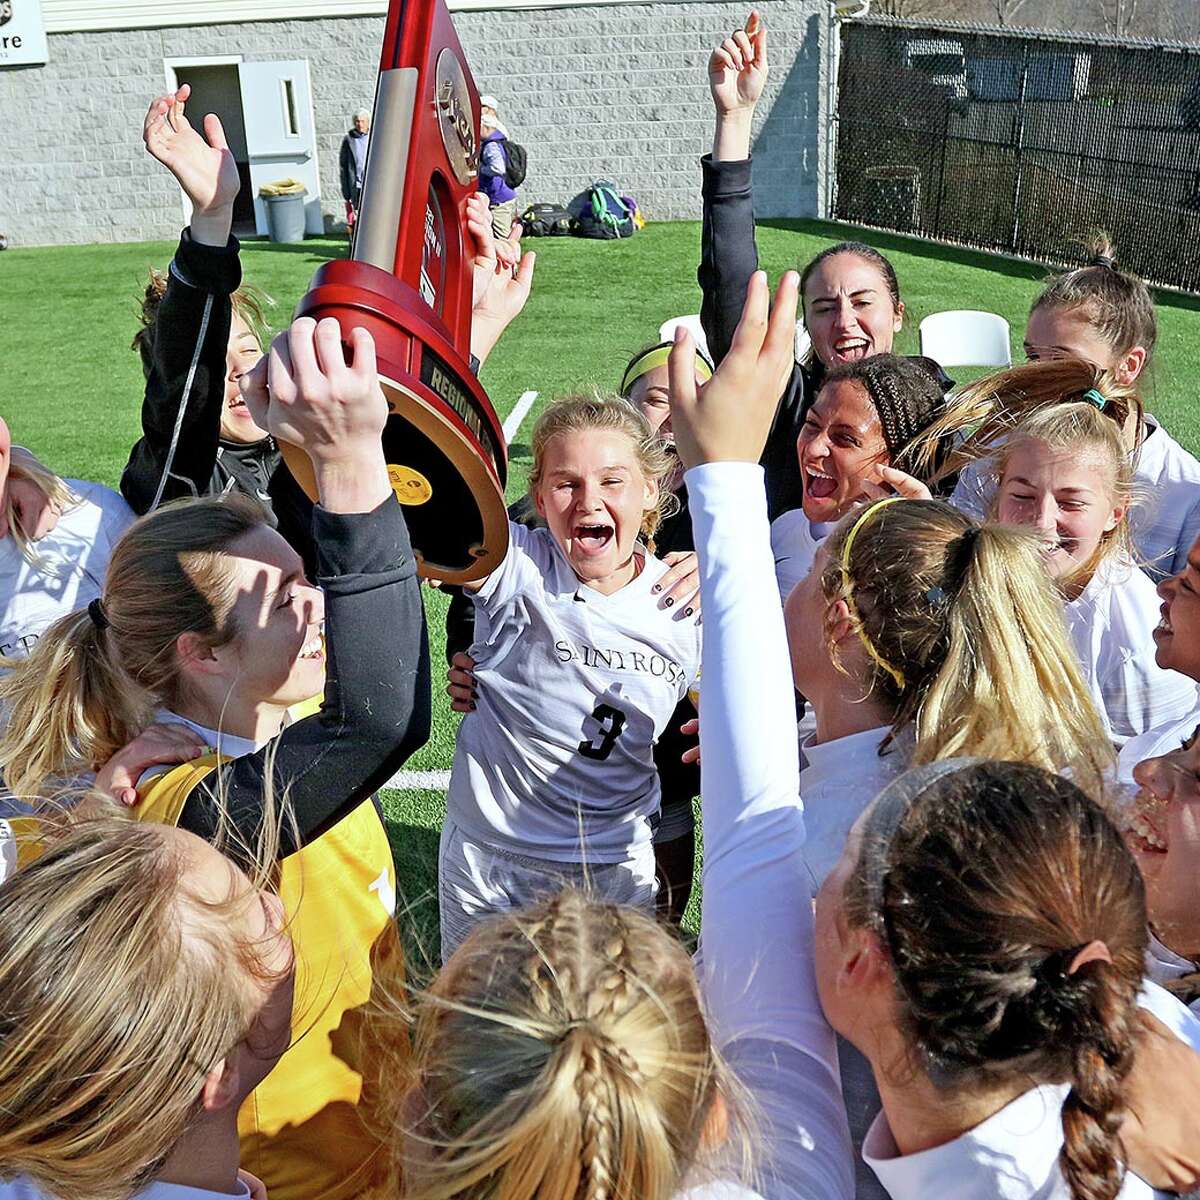 The Saint Rose women's soccer team holds the East Region trophy aloft after a 3-0 win over Mercy.